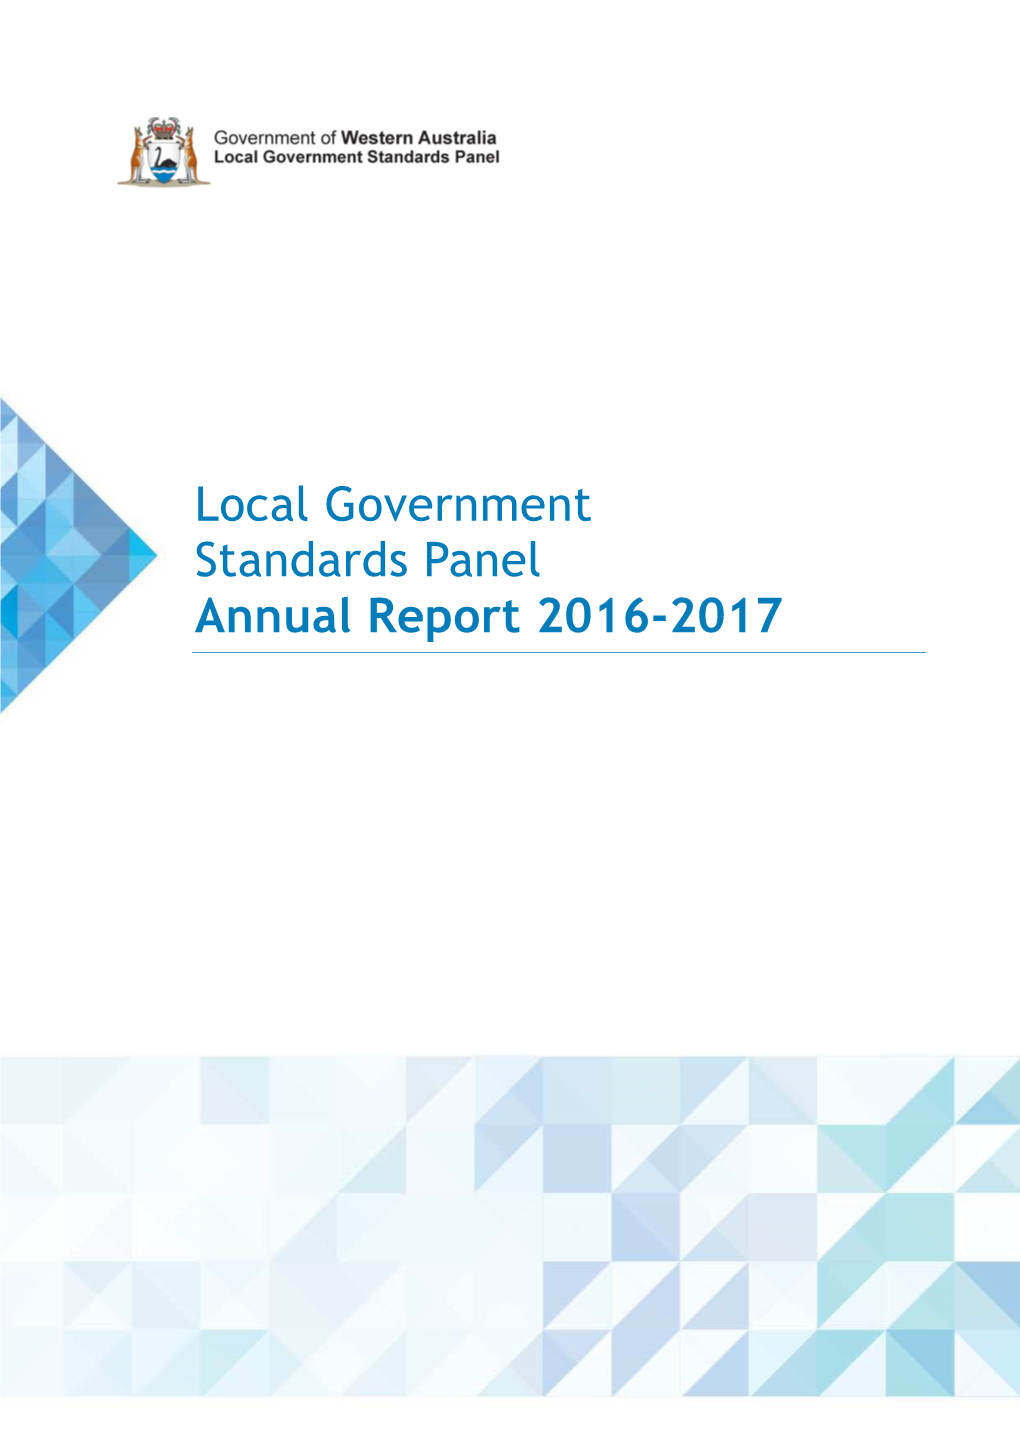 Local Government Standards Panel Annual Report 2016-2017